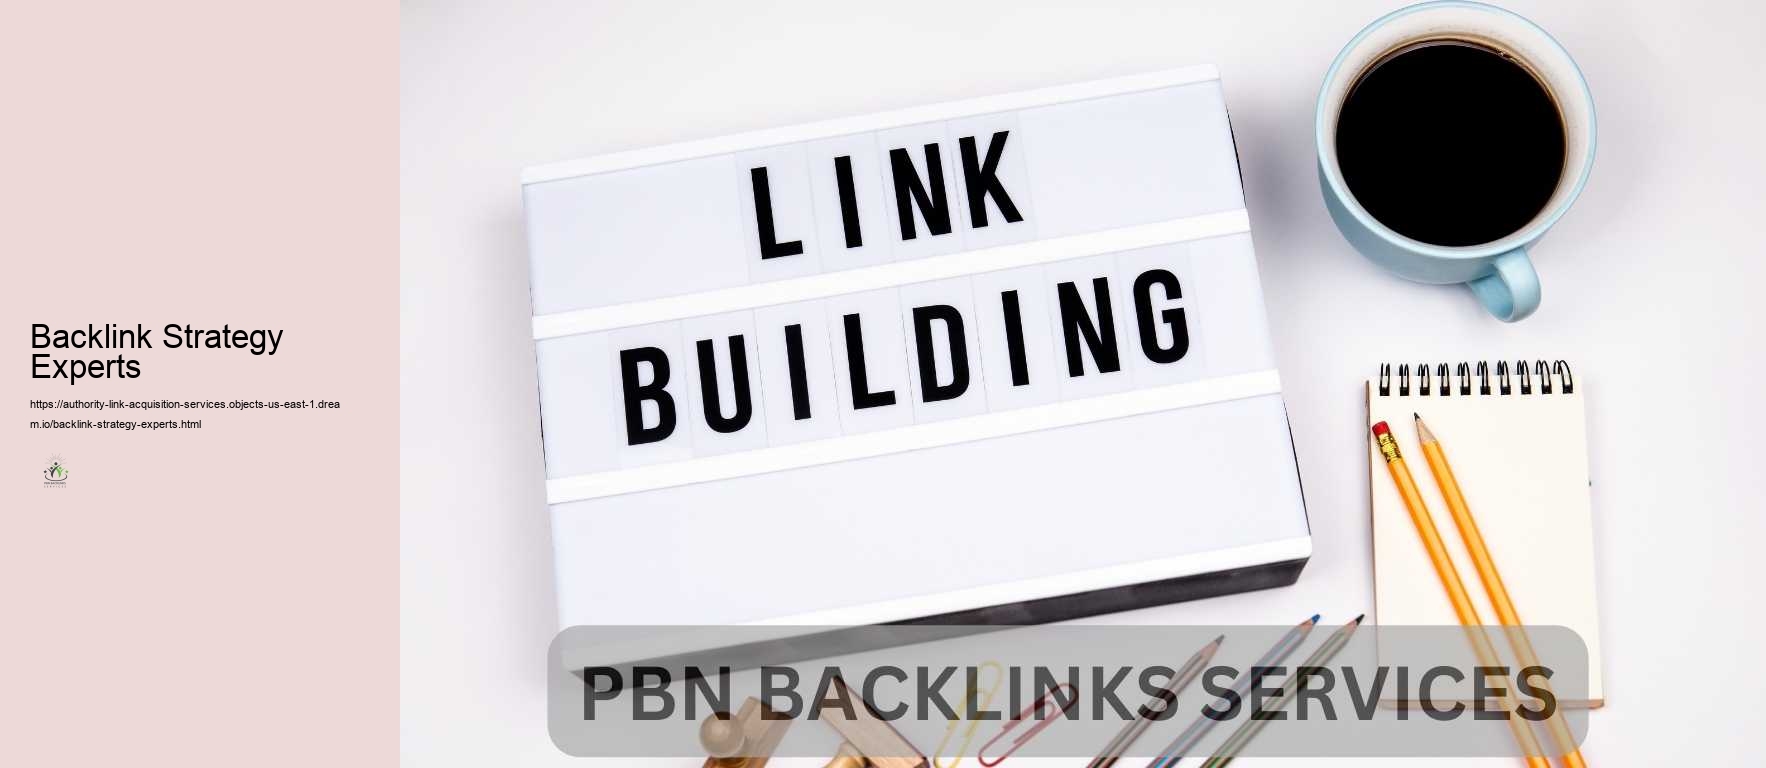 Backlink Strategy Experts